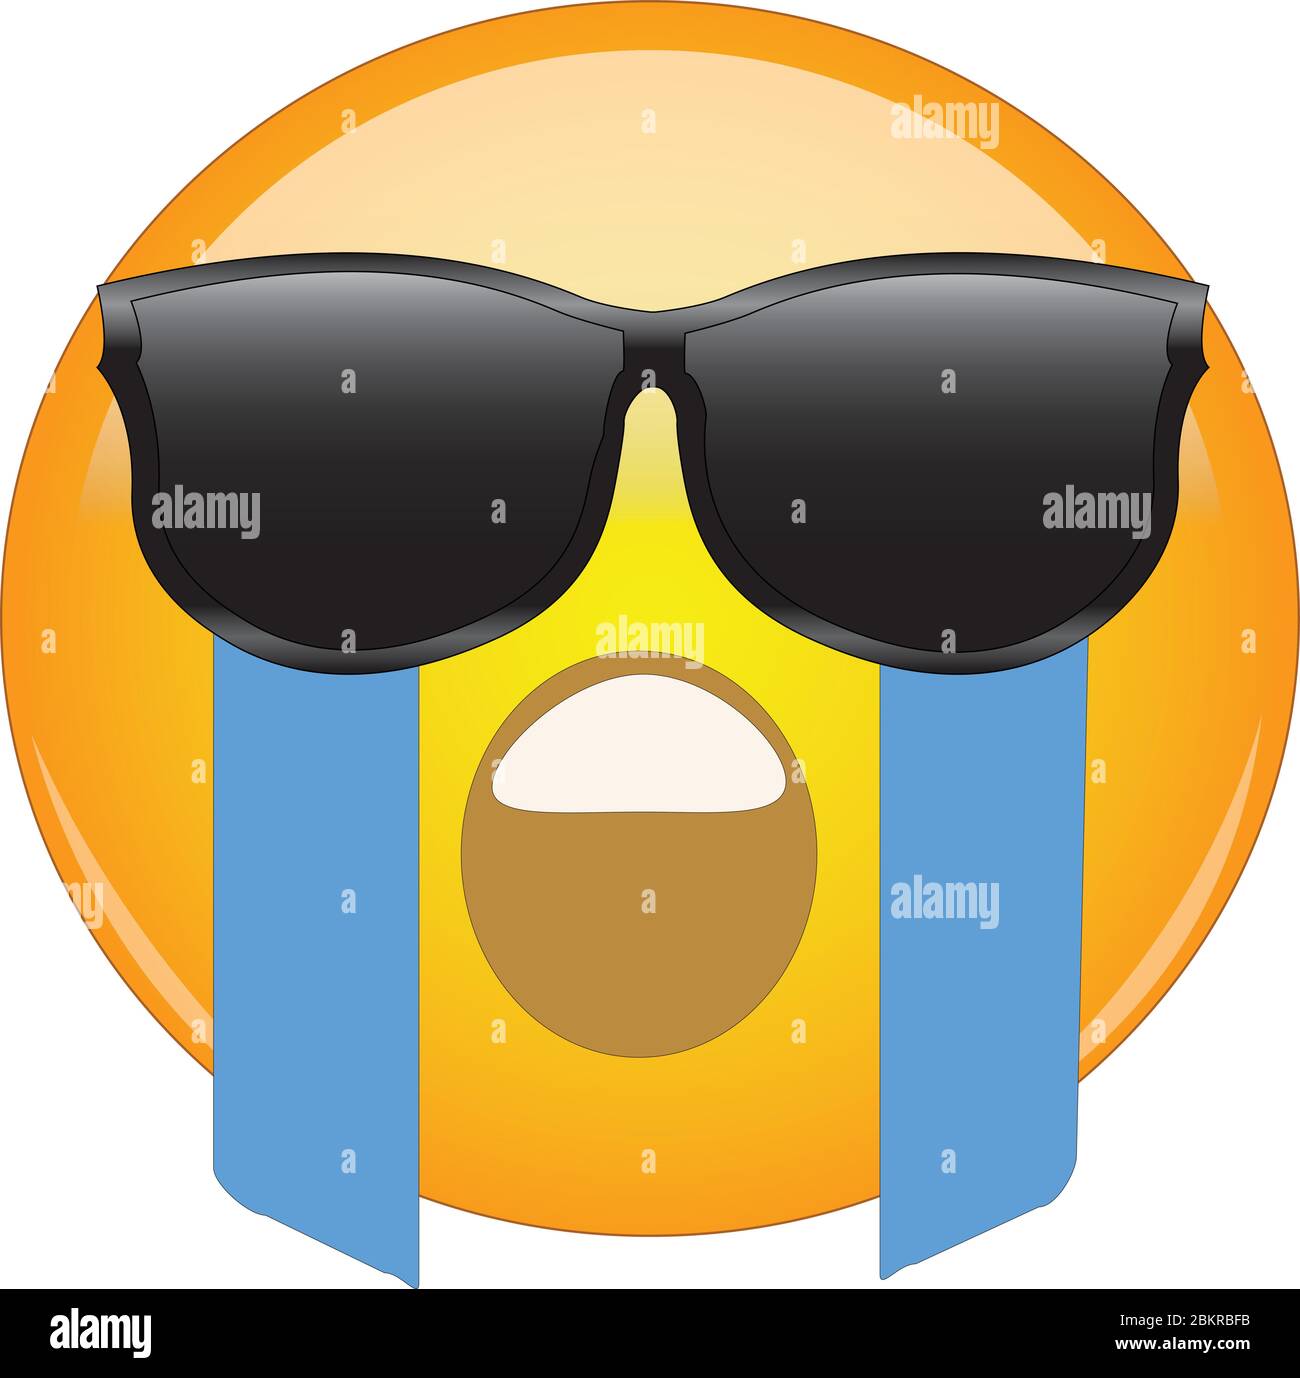 Cool Crying Face Emoji. Yellow face with an open mouth wailing and river of tears flowing from eyes hidden behind sunglasses. Expression of overwhelmi Stock Vector